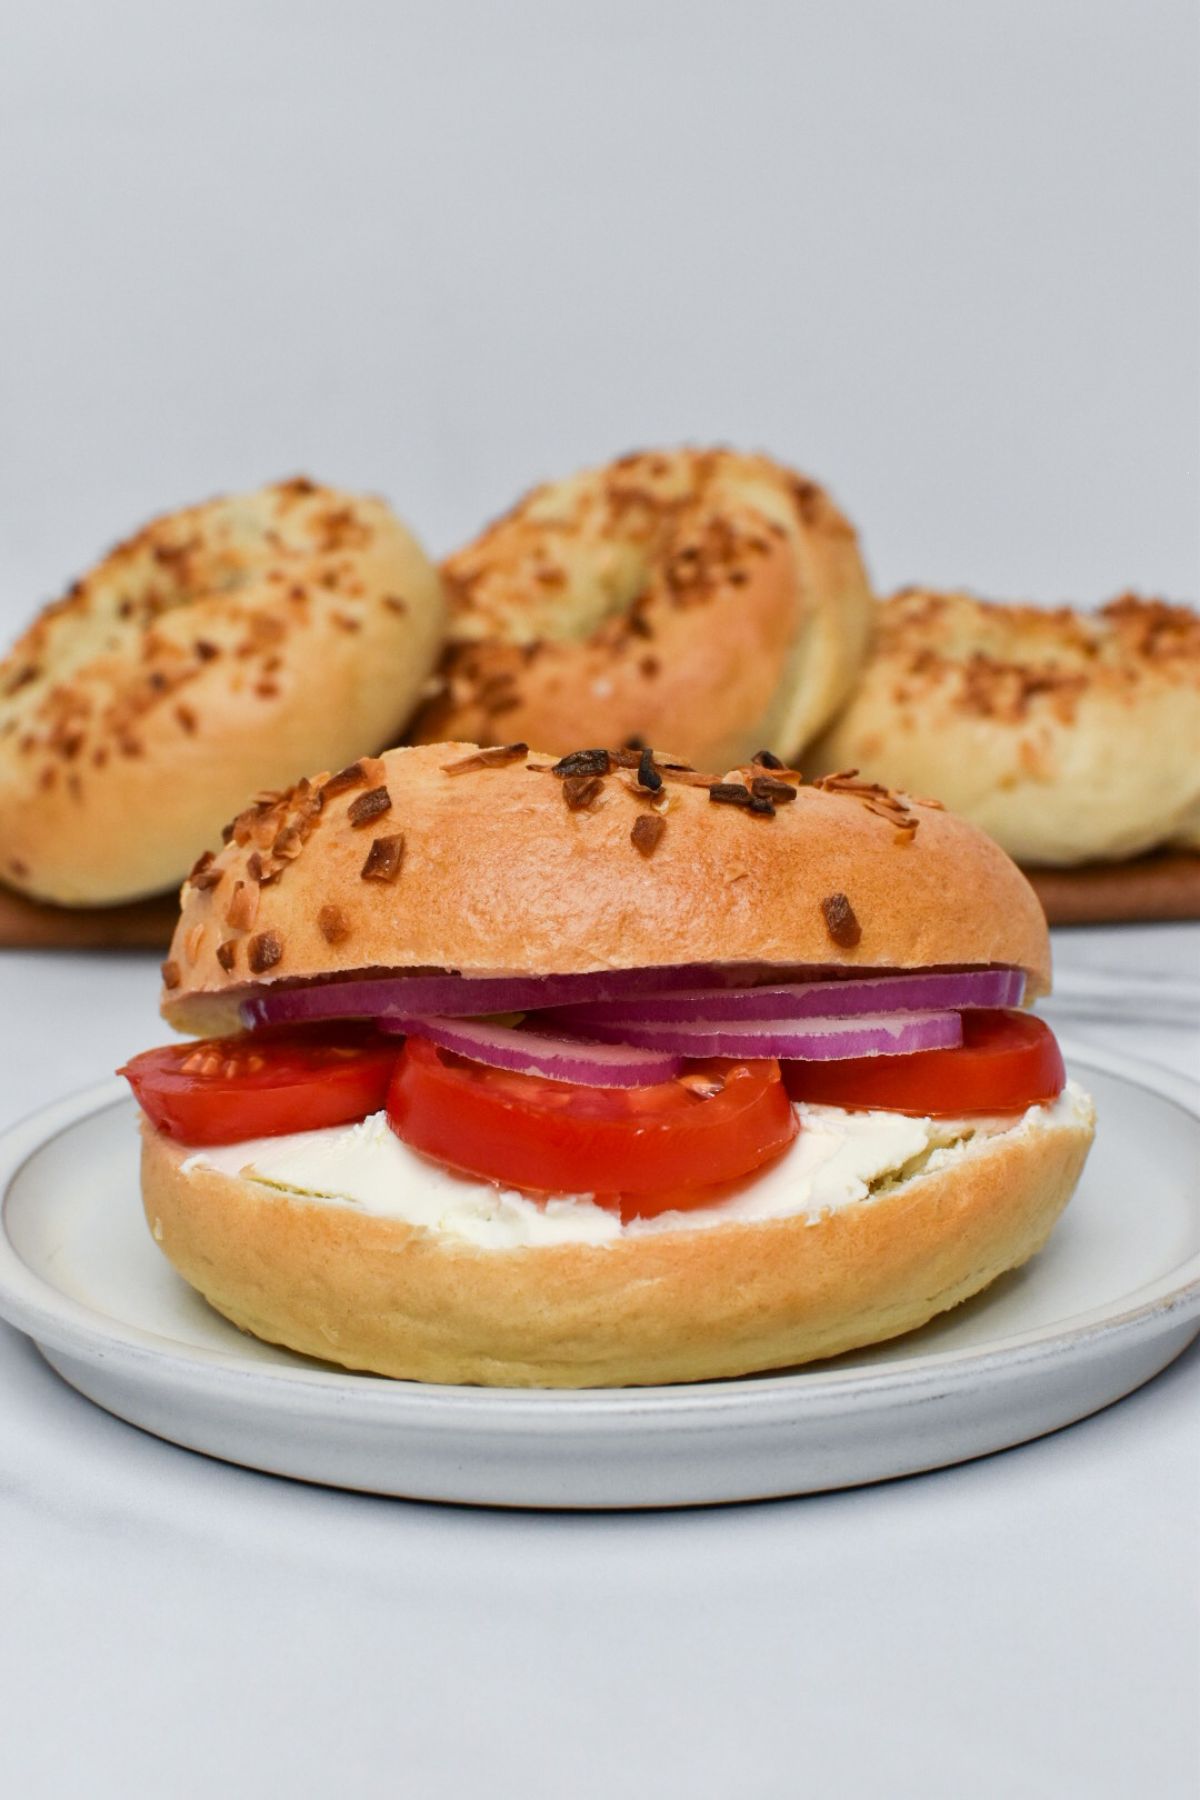 An onion bagel with cream cheese, tomato, and red onion on it with more bagels in the background.